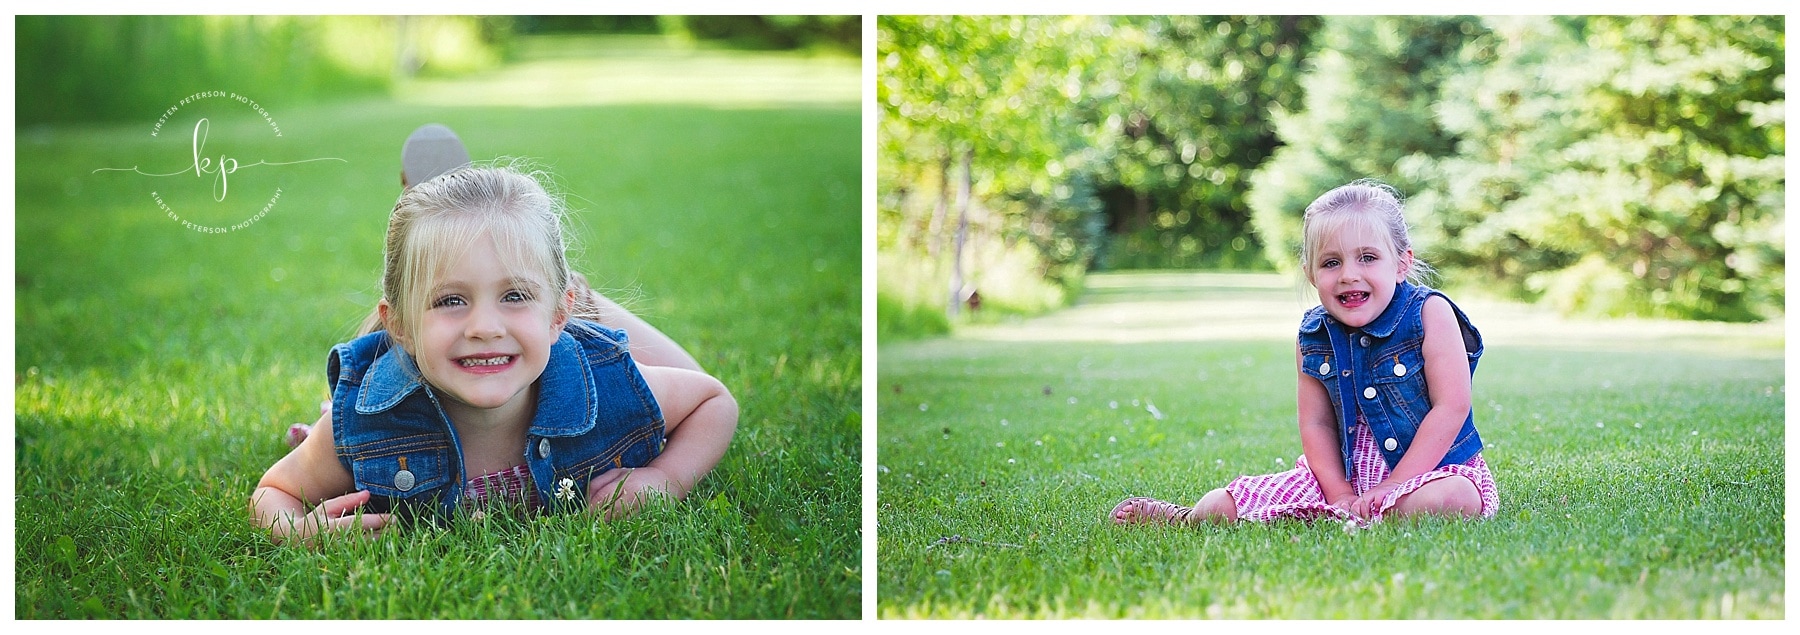 3 year old little girl photography session in green park setting in summer in de pere wisconsin